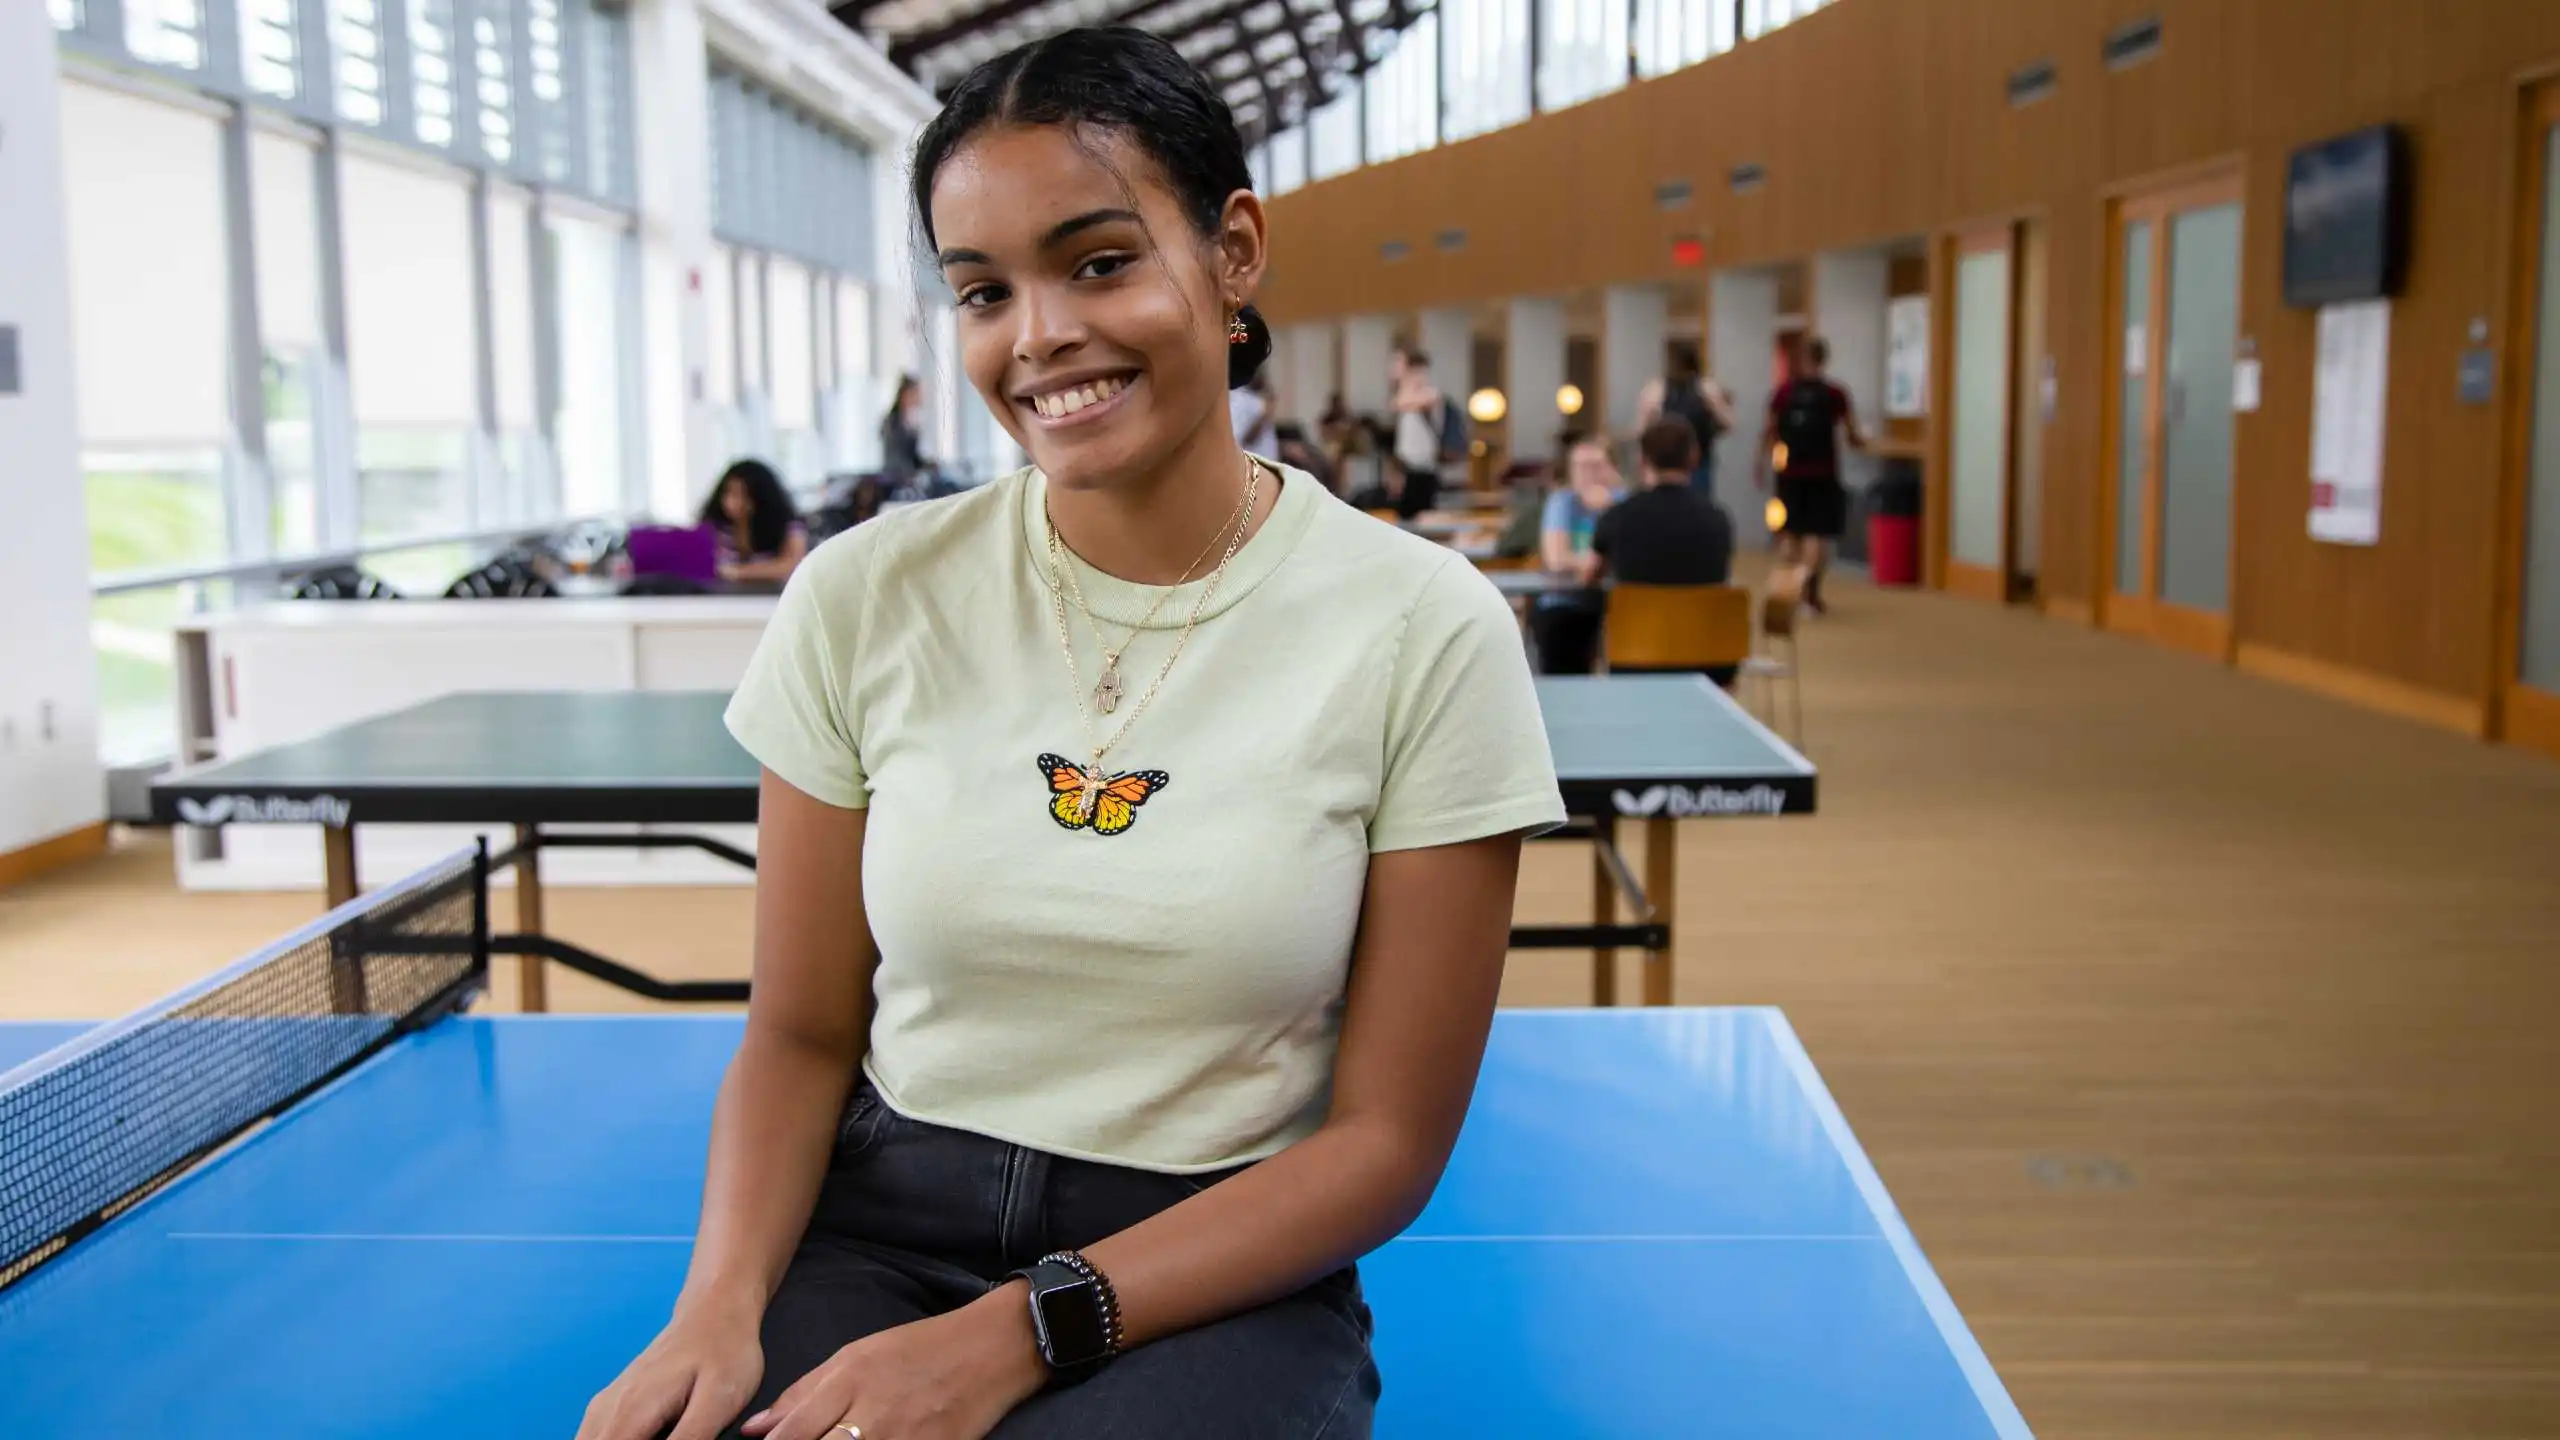 Student smiles at the camera while sitting on a ping pong table